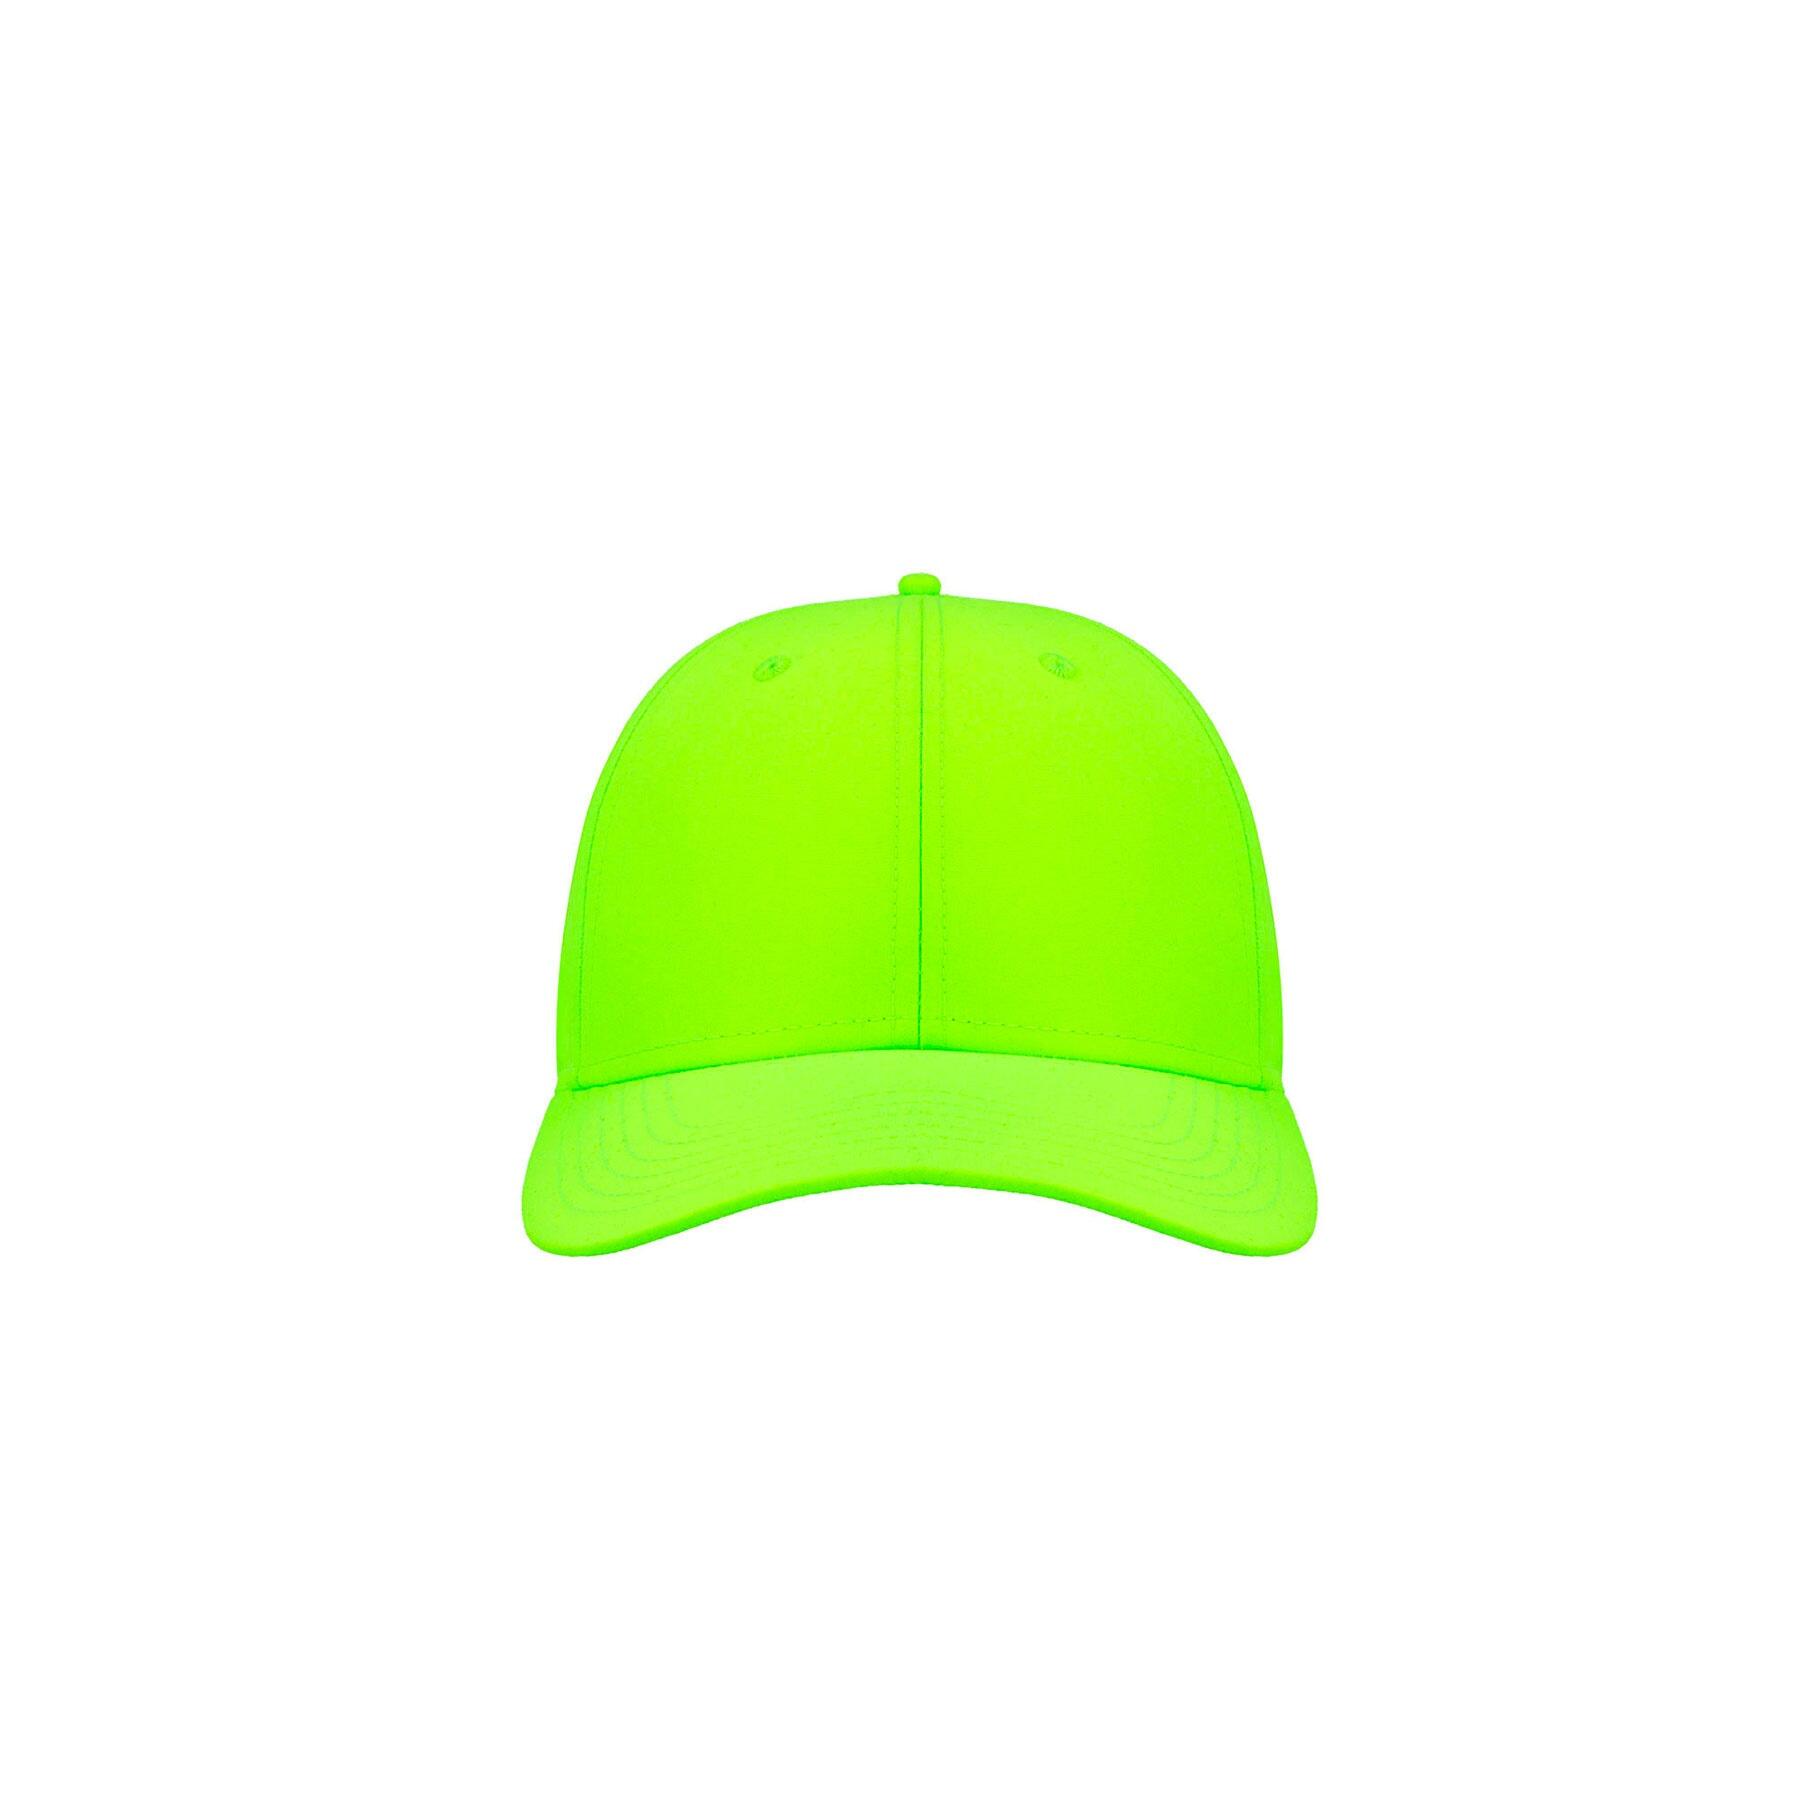 Recy Feel Recycled Twill Cap (Safety Green) 3/3